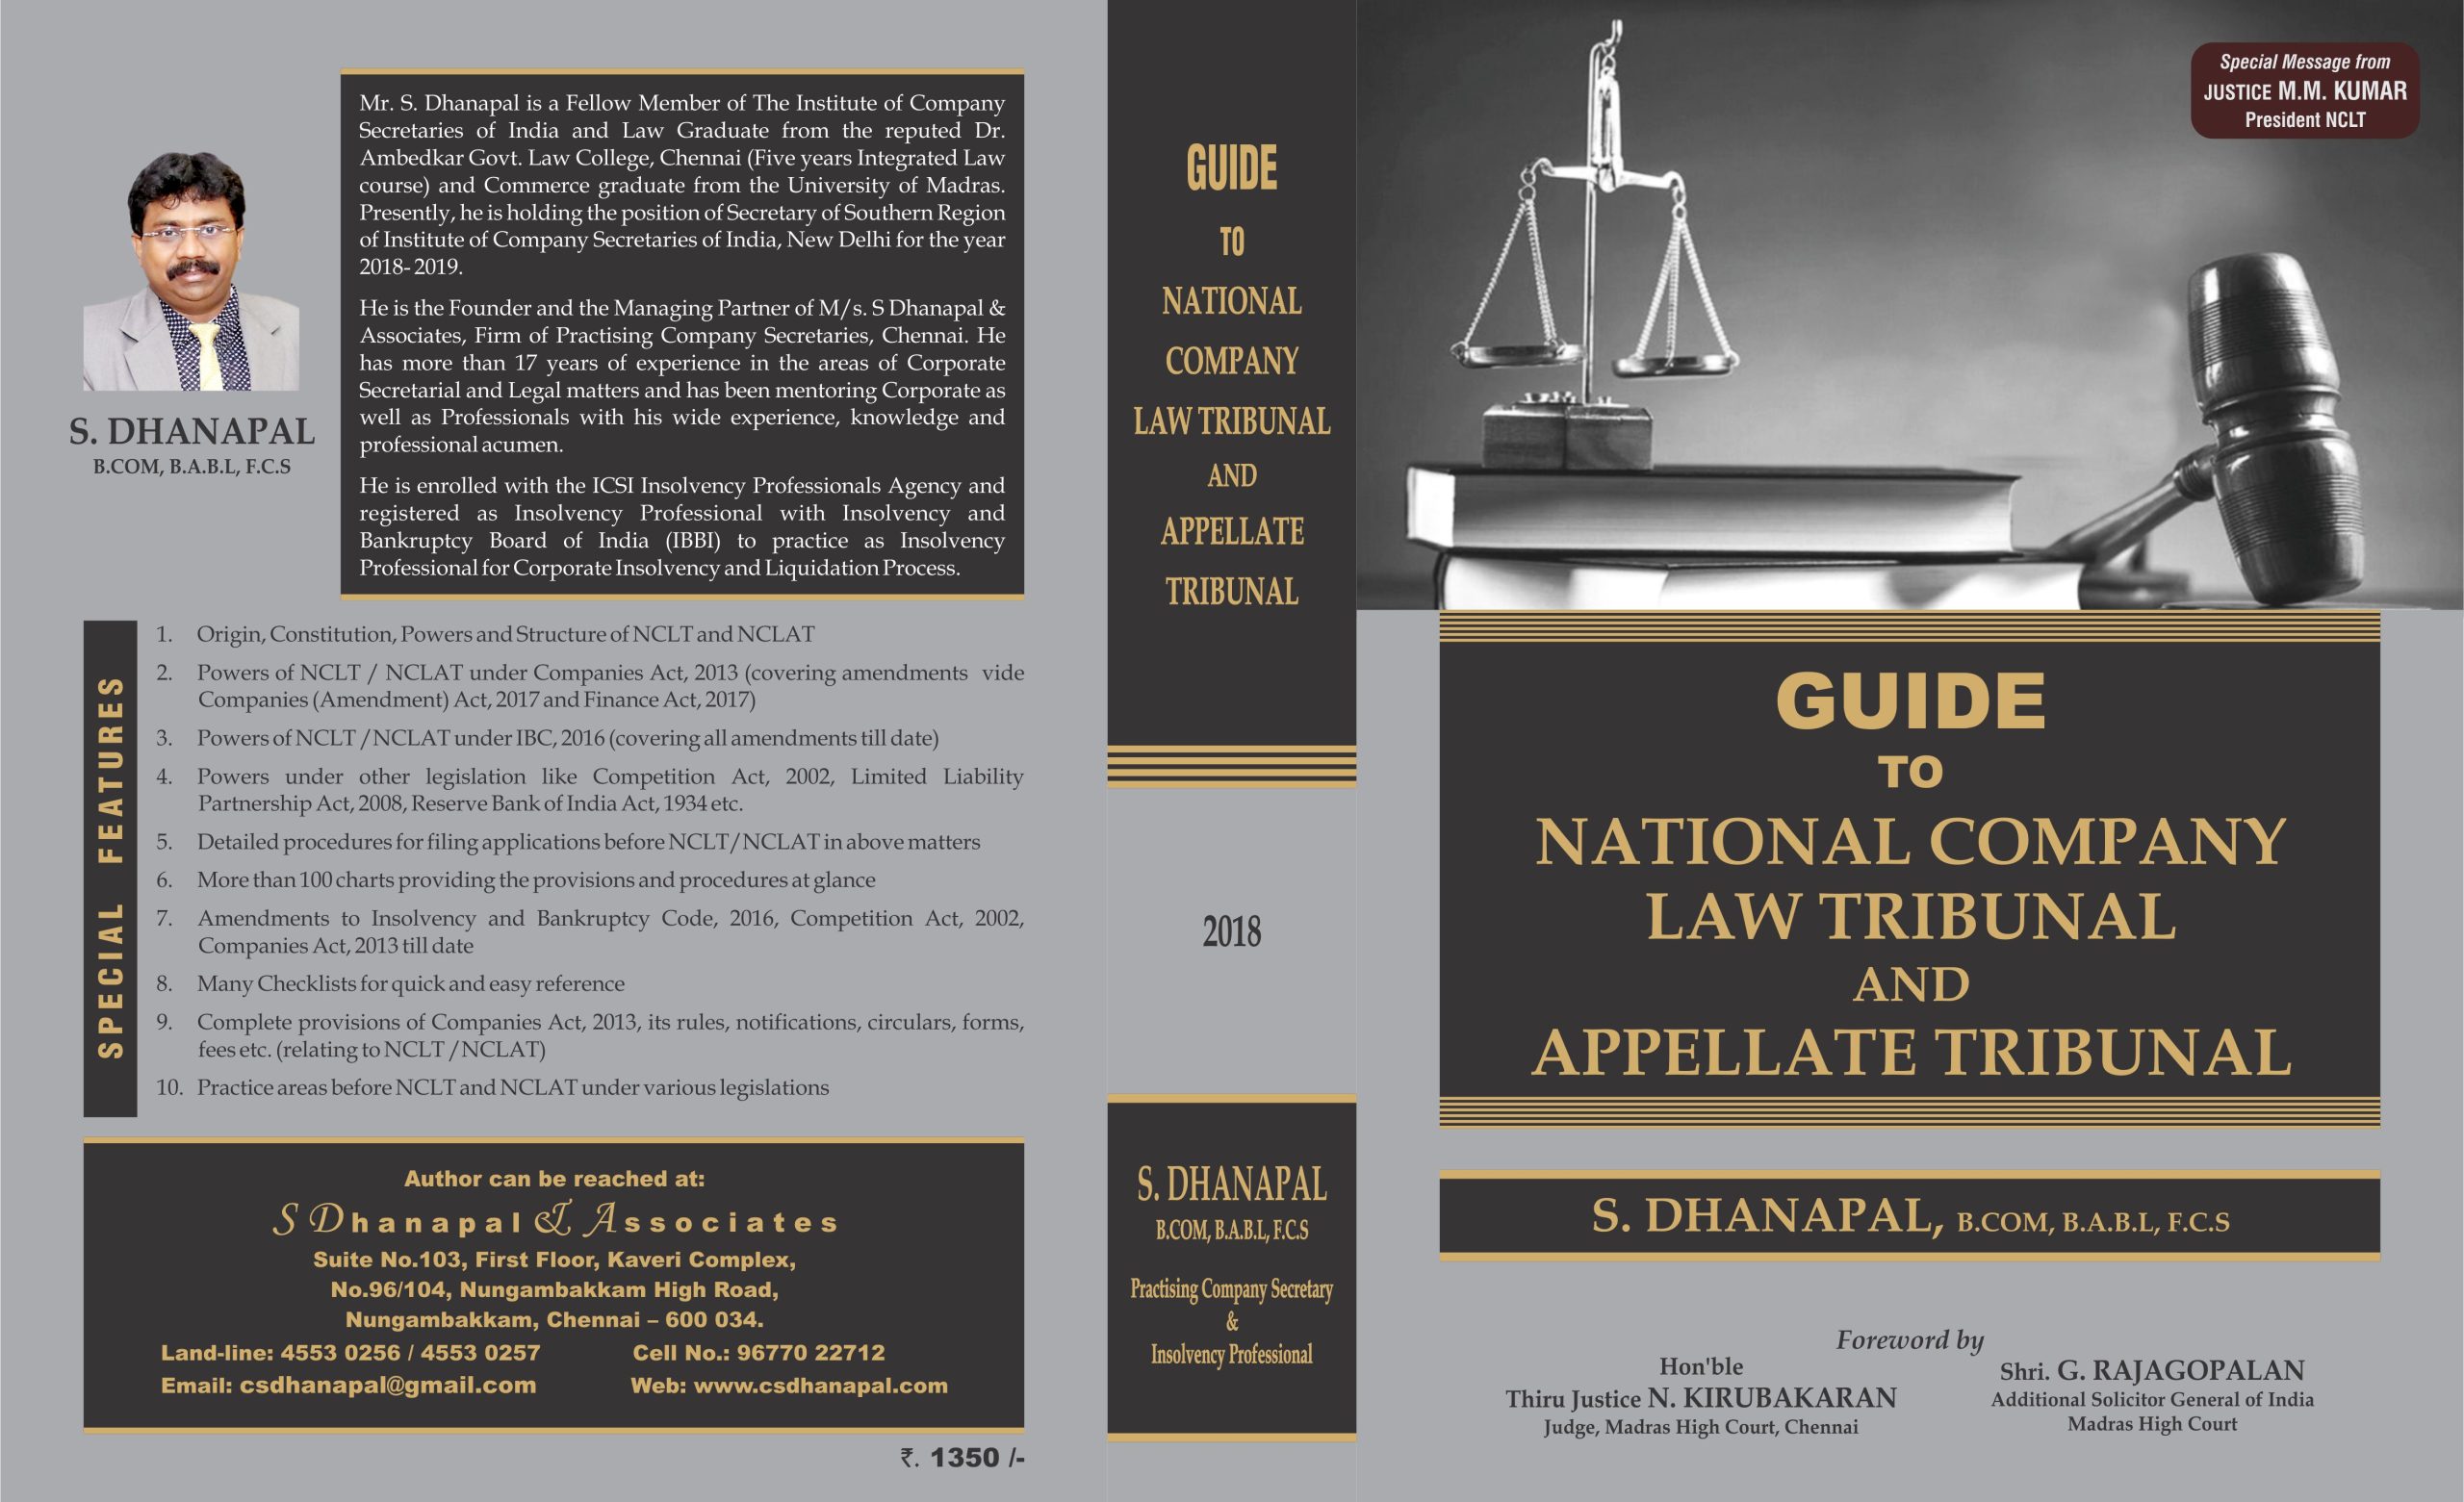 COMPANY-LAW-APPELLATE-TRIBUNAL-wrapper-